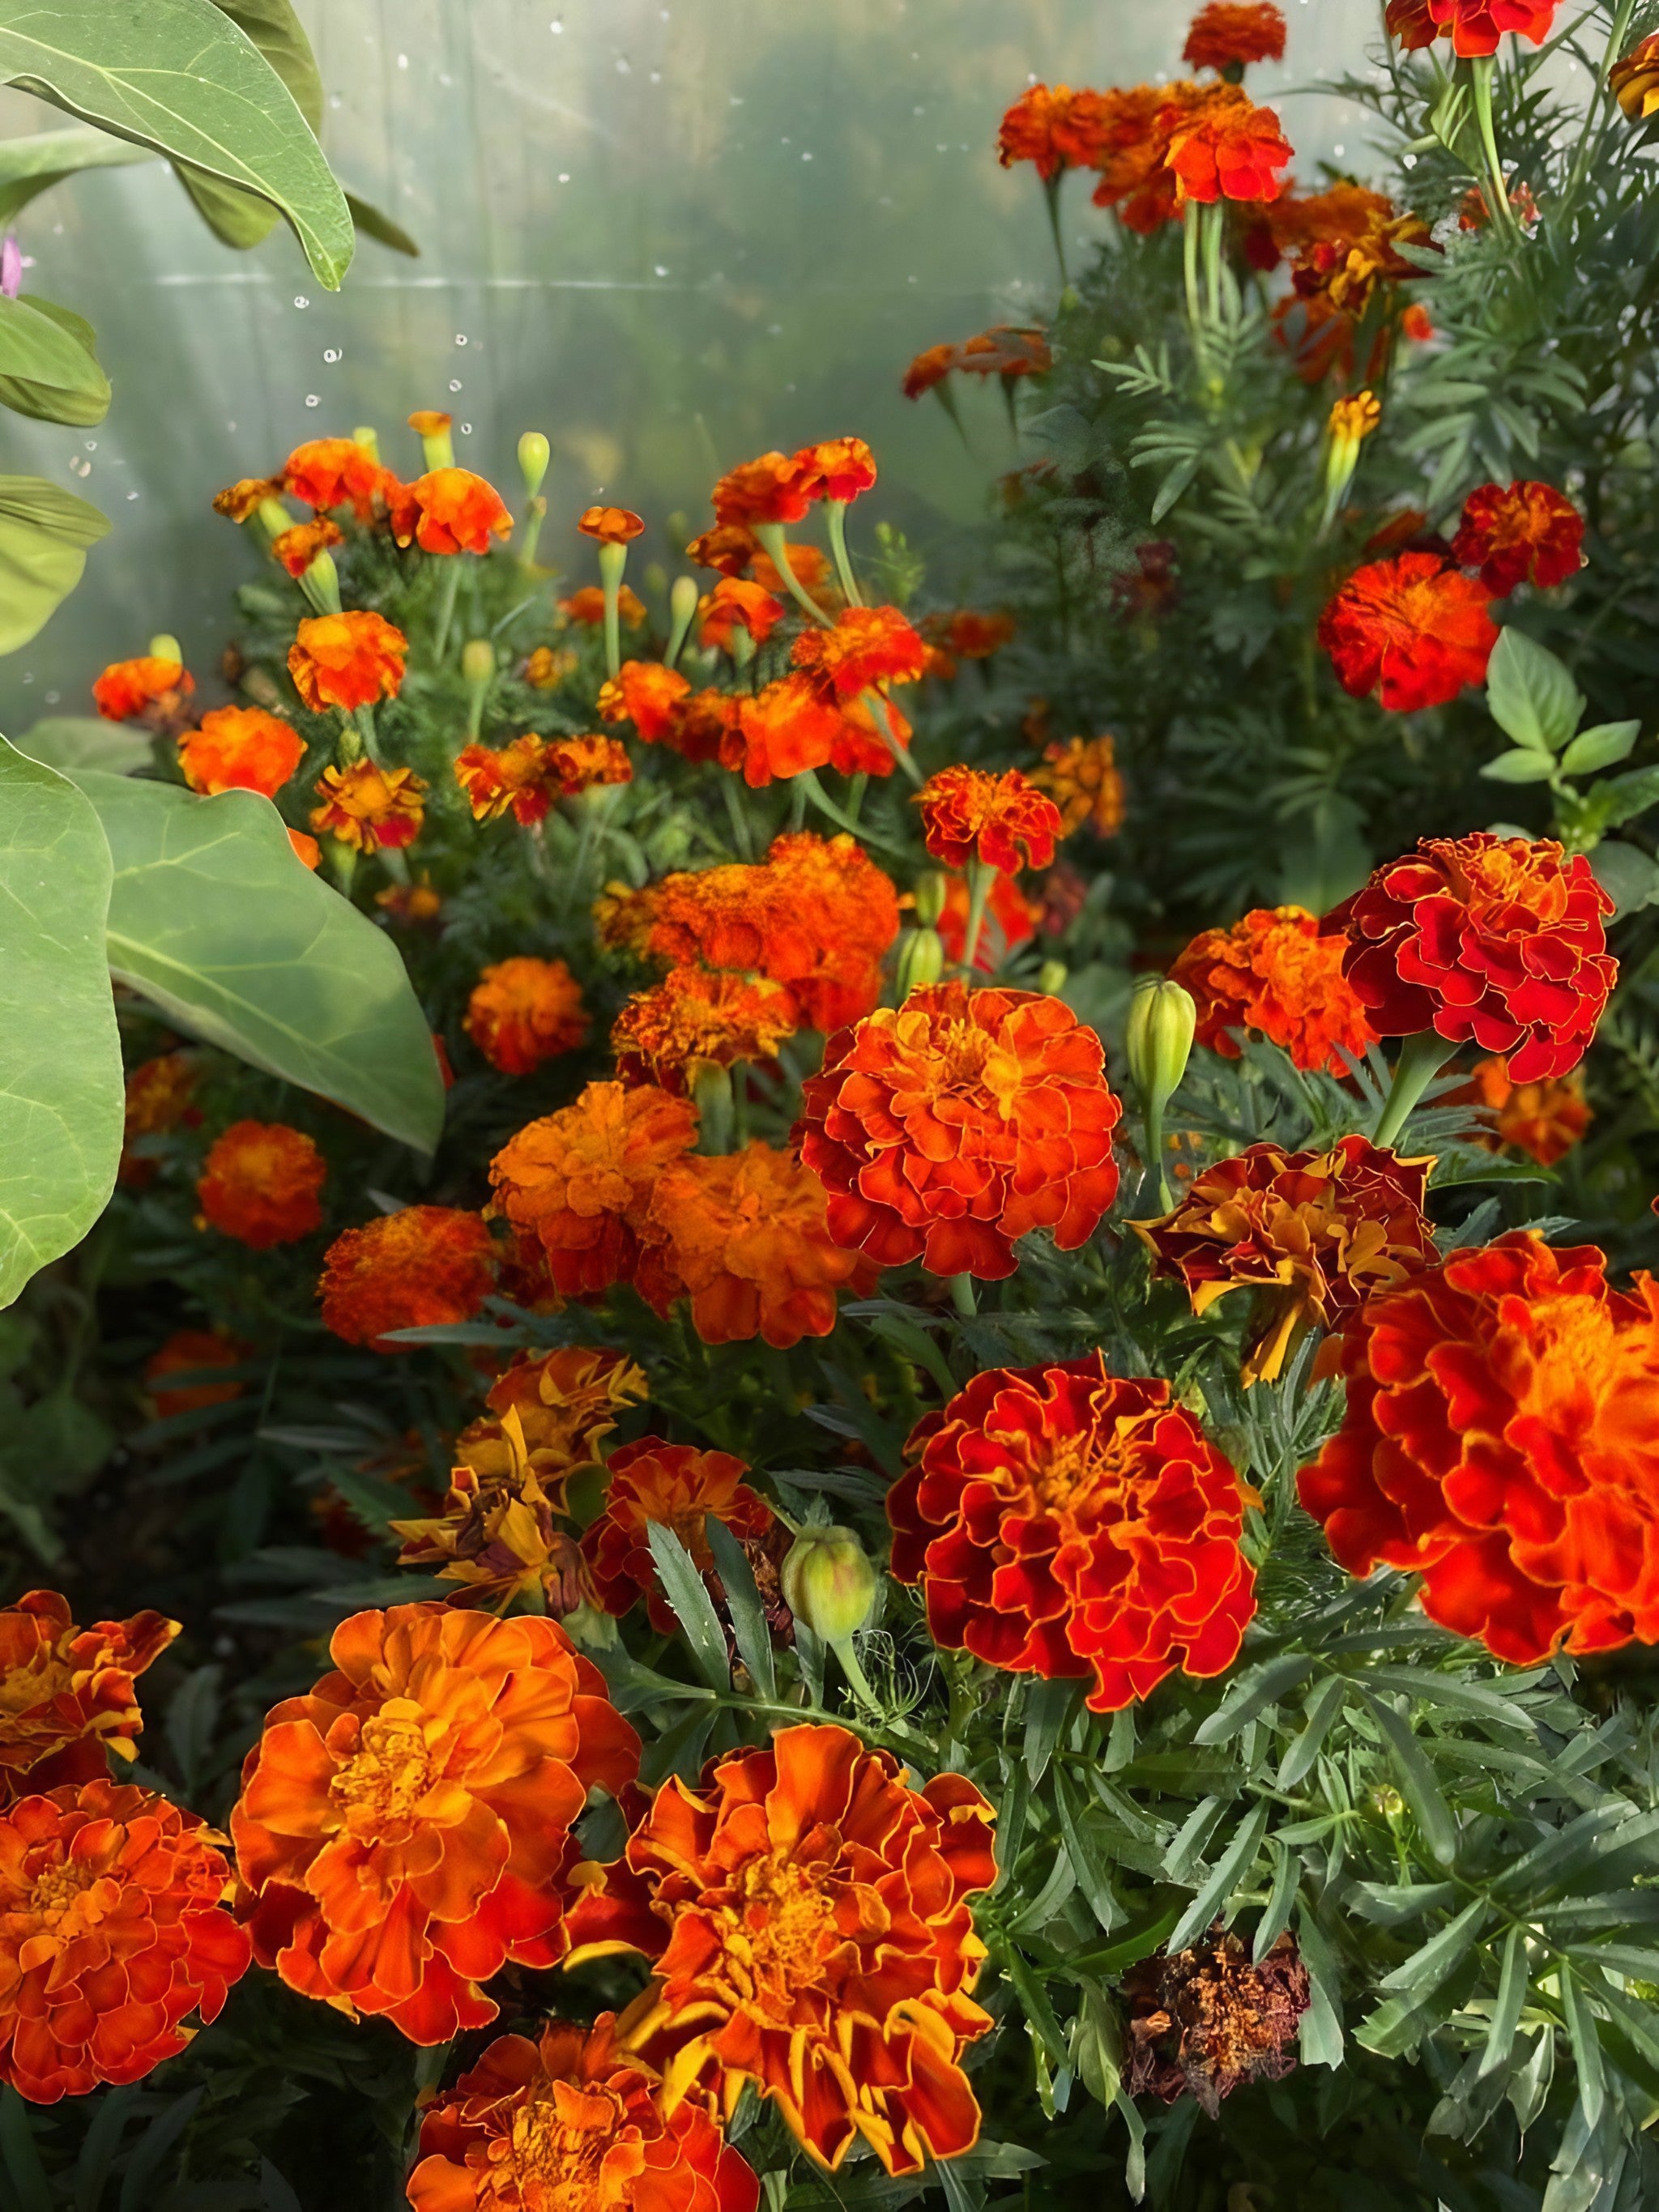 Close-up of French Marigold Red Cherry flowers with a mix of orange and yellow petals